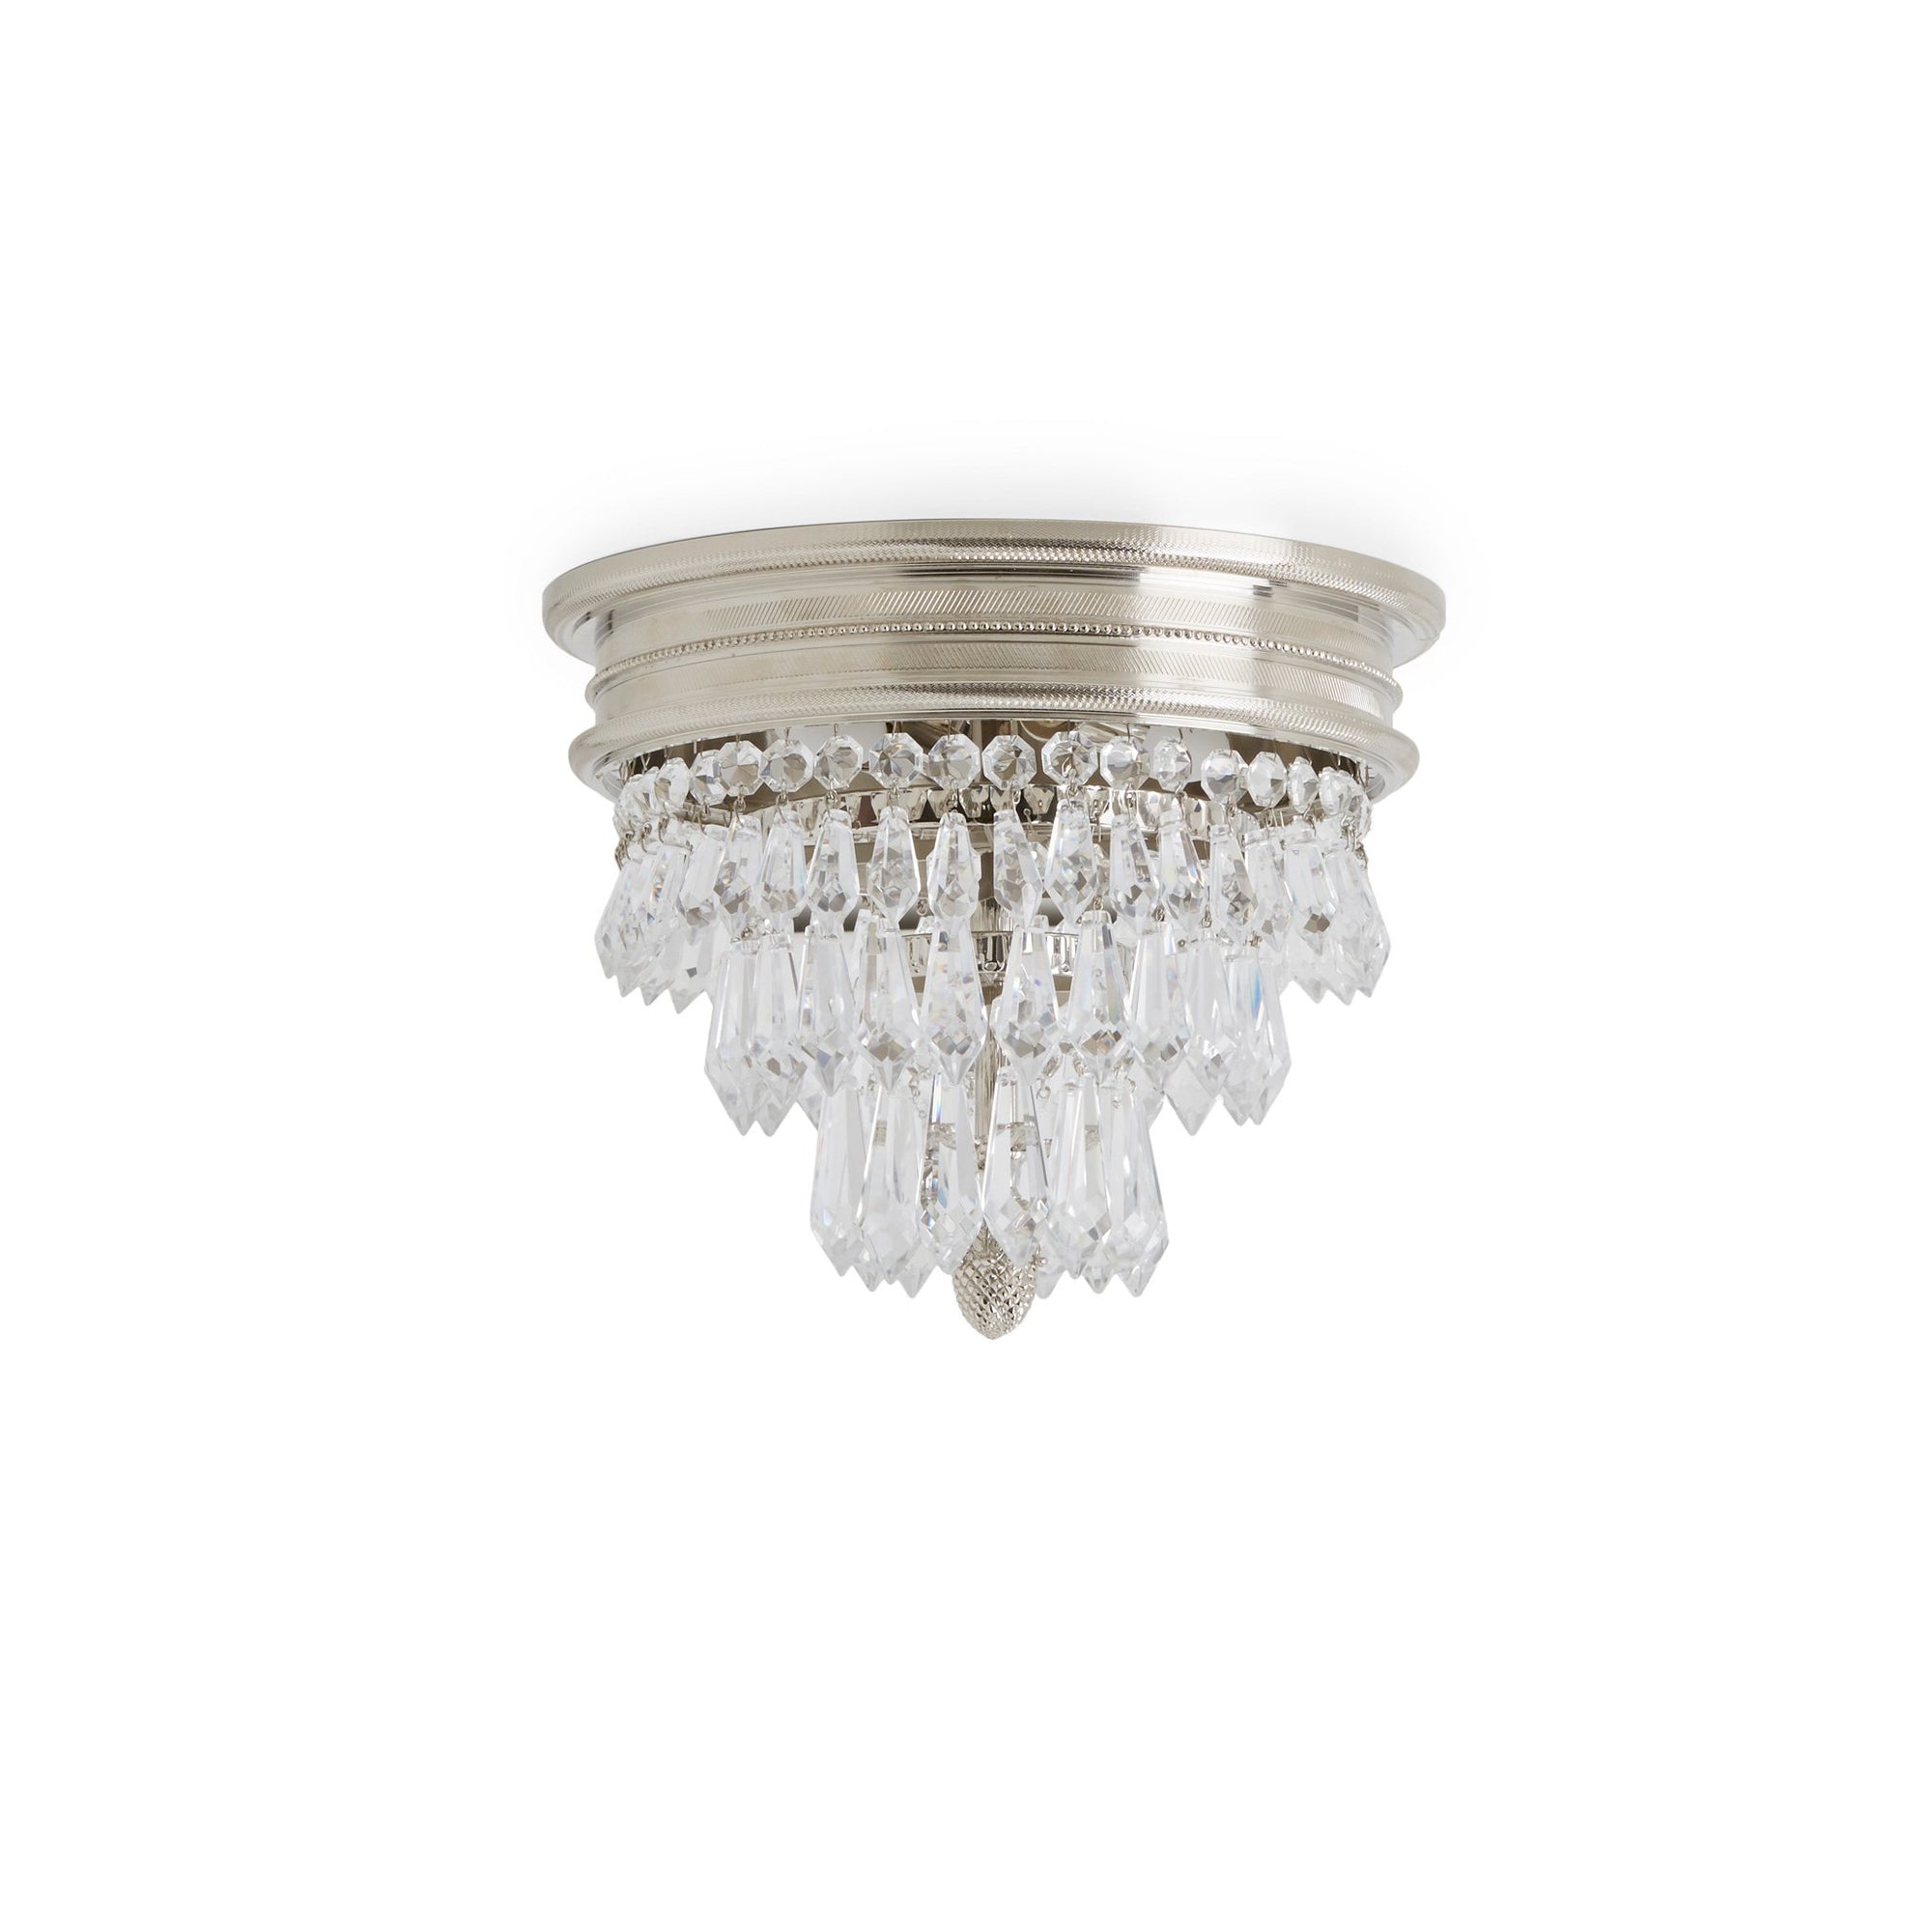 7132-CRYS-PN Sherle Wagner International Knurled Crystal Prism Ceiling Light in Polished Nickel metal finish